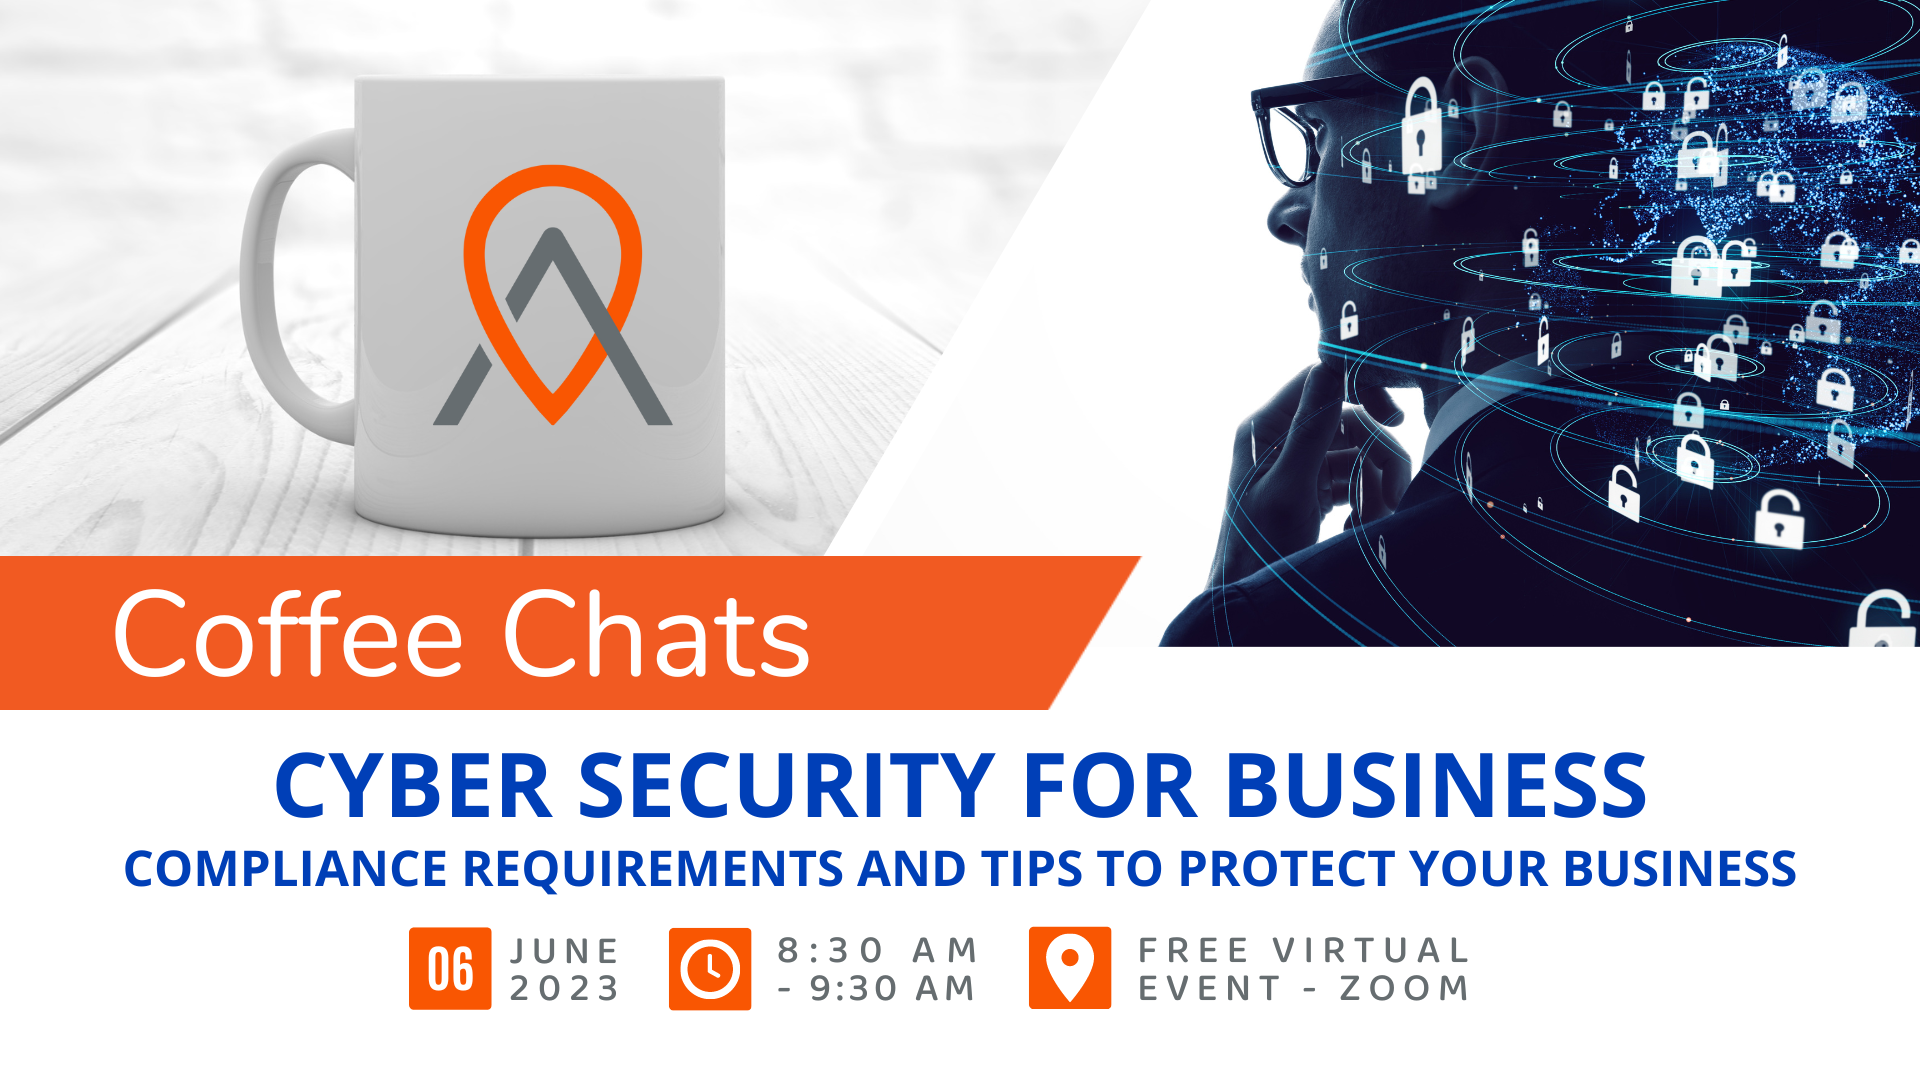 Event Promo Photo For Coffee Chats - Cyber Security for Business